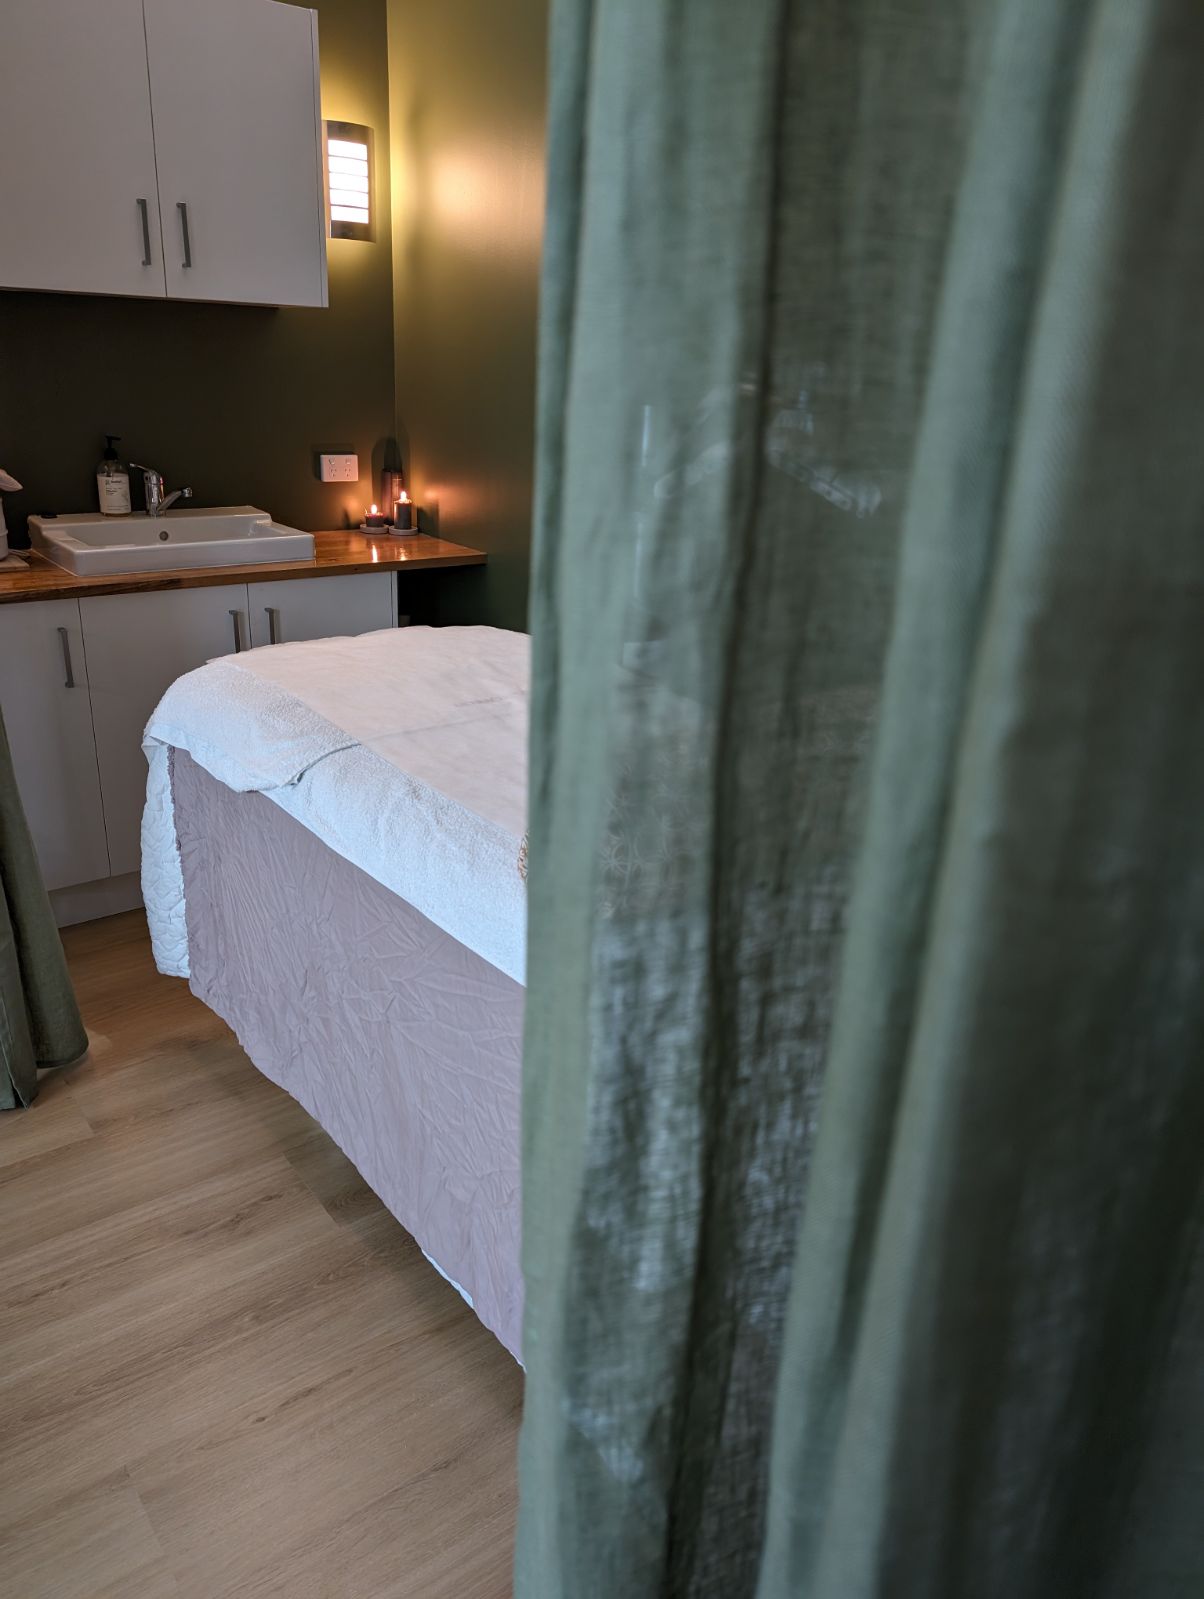 Immerse yourself in serenity with our exquisite treatment room at Skinn. Experience tranquility and relaxation in our beautifully designed treatment space, setting the perfect ambiance for our rejuvenating treatments.